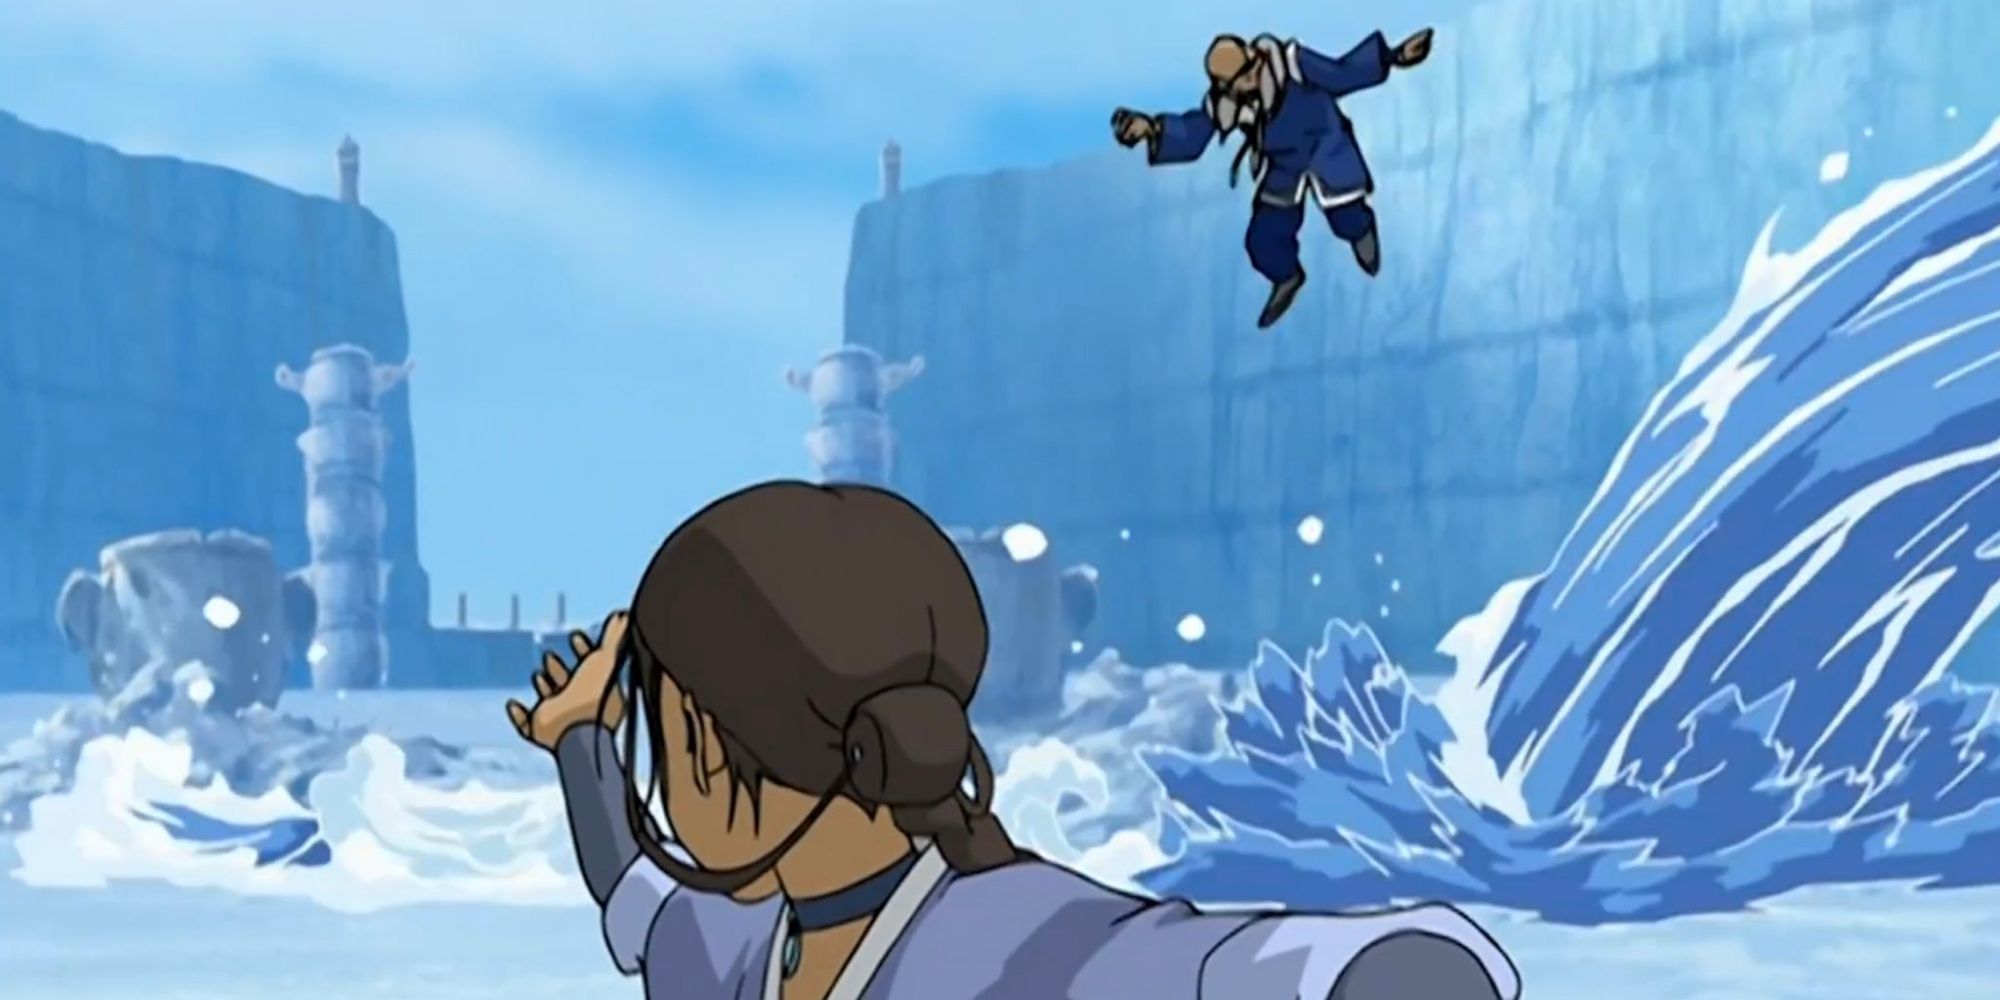 Katara fighting in the Northern Water Tribe city in Avatar The Last Airbender